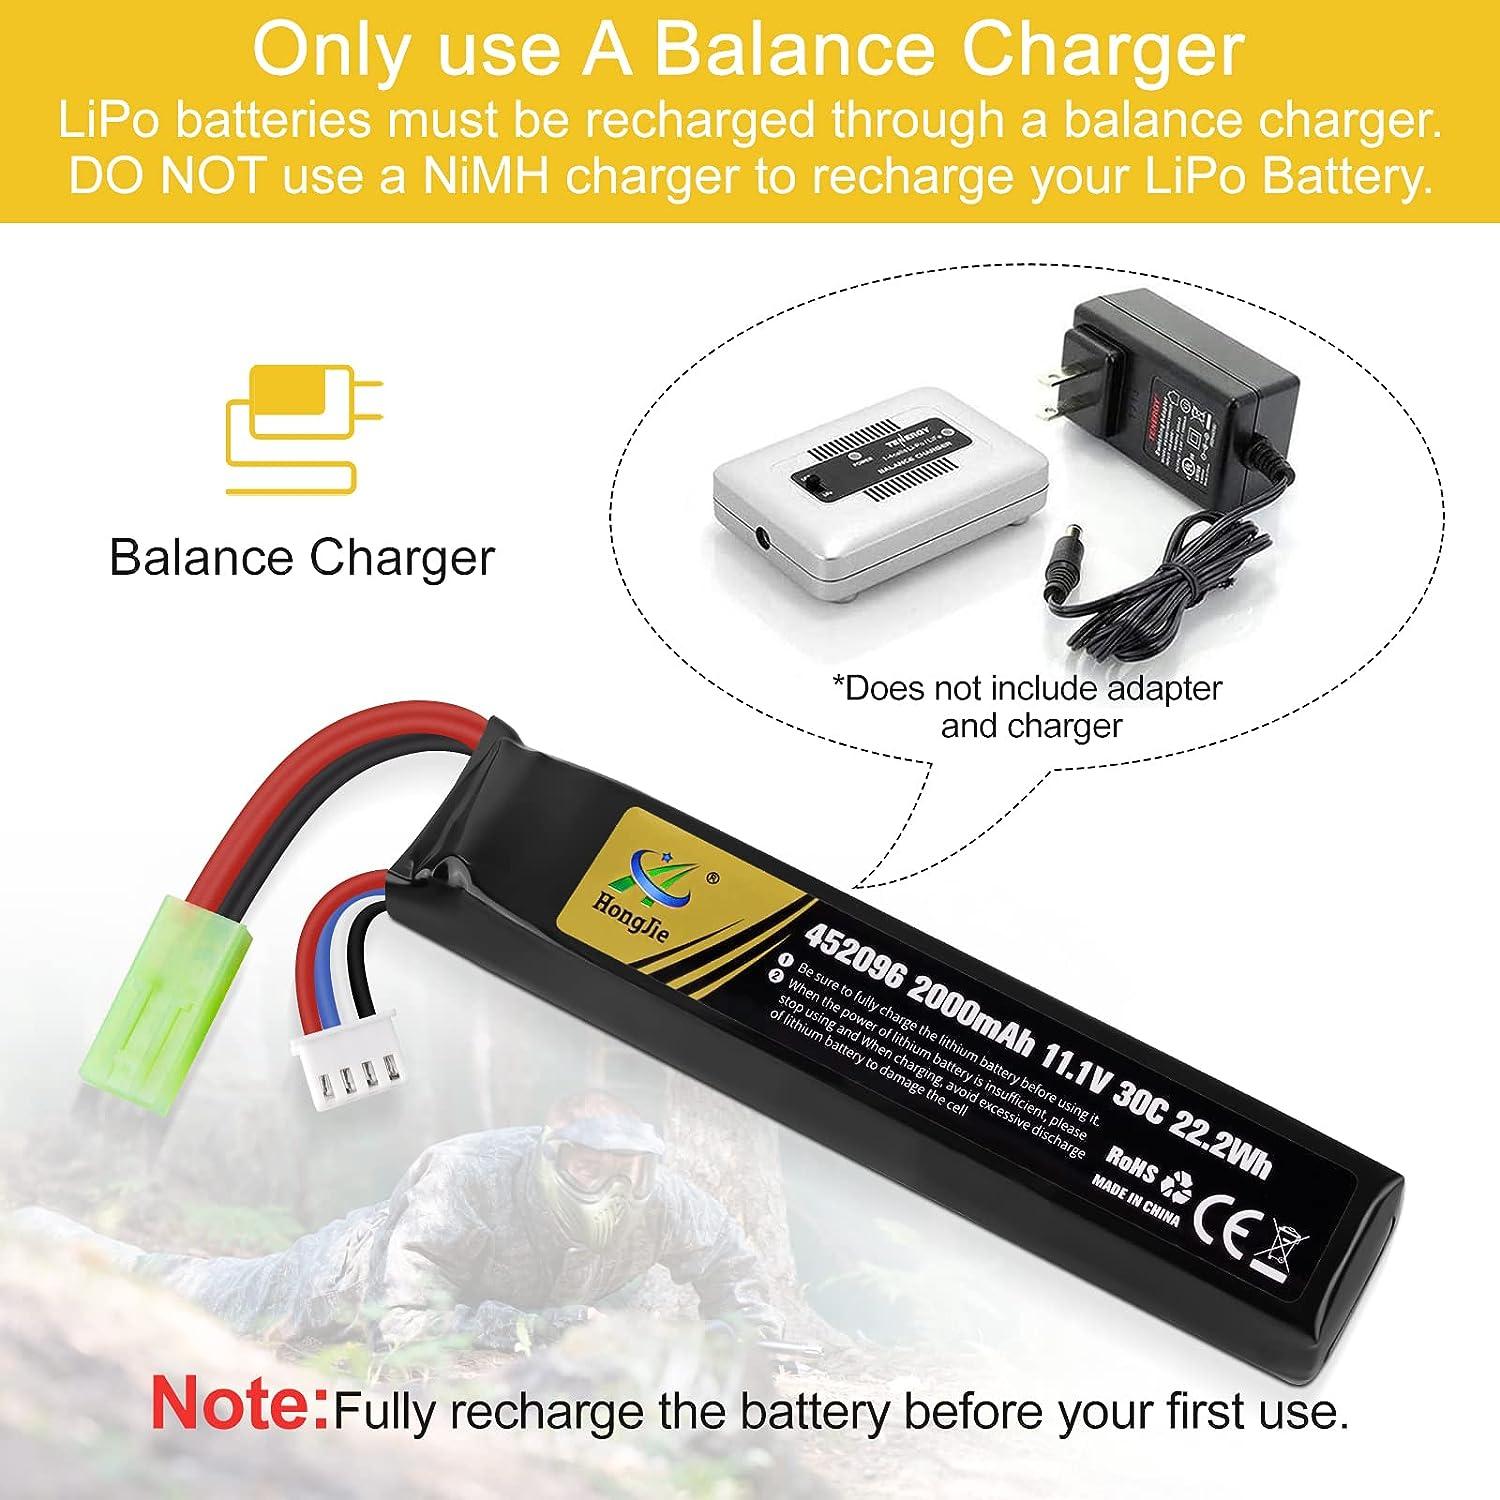 Airsoft Battery 11.1V Rechargeable 3S LiPo 2000mAh 30C Hobby Battery with  Mini Tamiya & JST XH Connector for Airsoft Model Rifle RC Car Drone